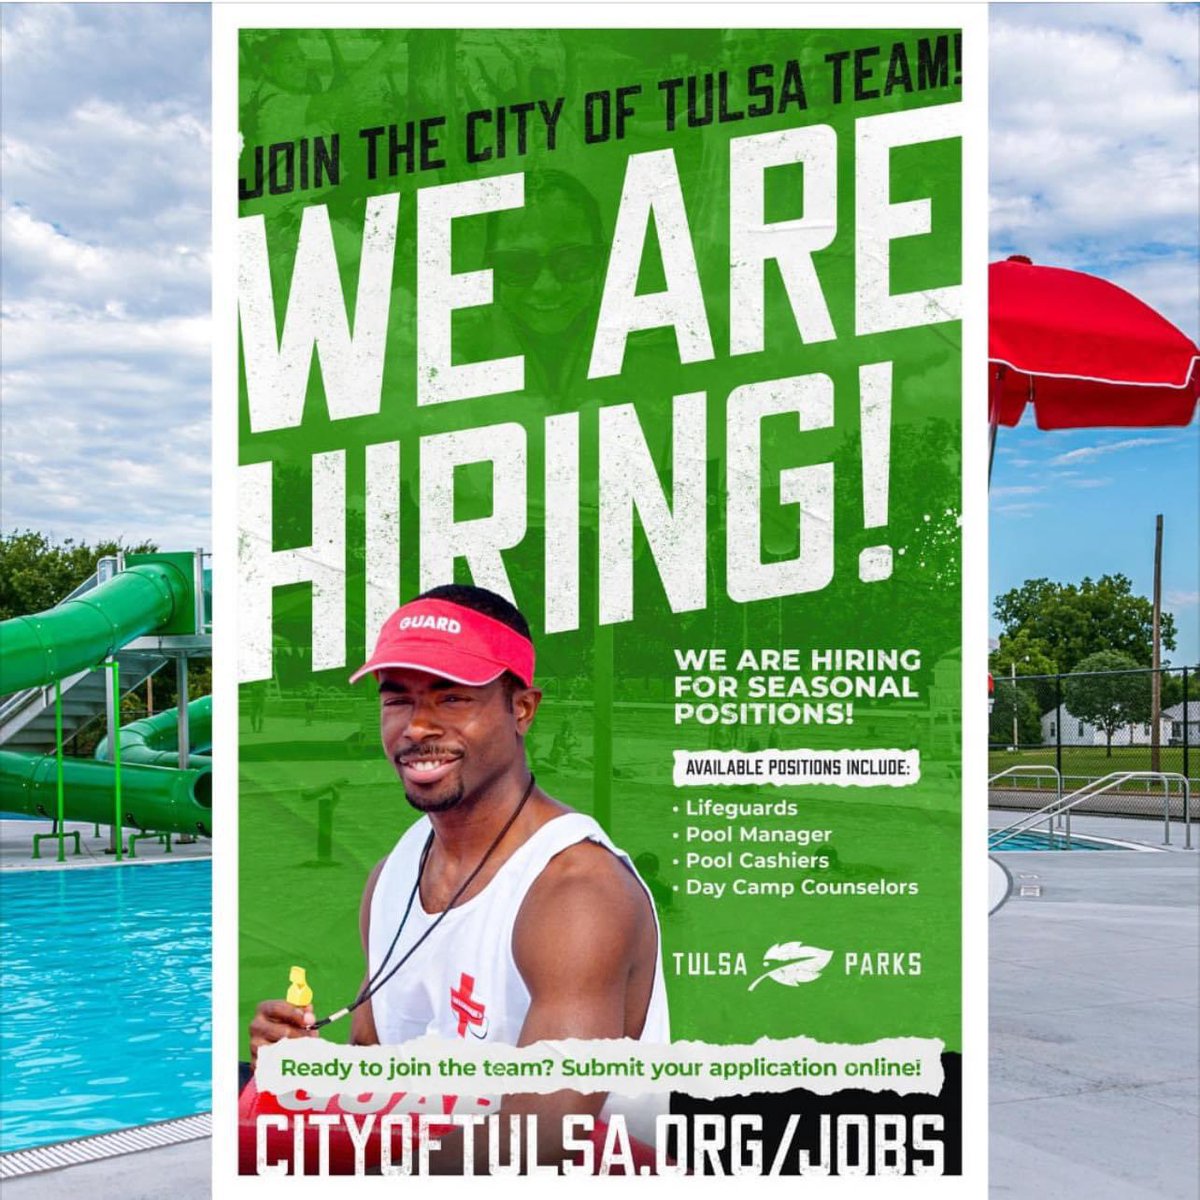 Join us today for the Parks Seasonal Job Career Fair! Are you looking for a summer position? We have openings for camp counselors, lifeguards, pool managers, and pool cashiers. Interview today. April 6 | 9 a.m. - 1 p.m. Centennial Center in Veterans Park 1028 E 6th St.